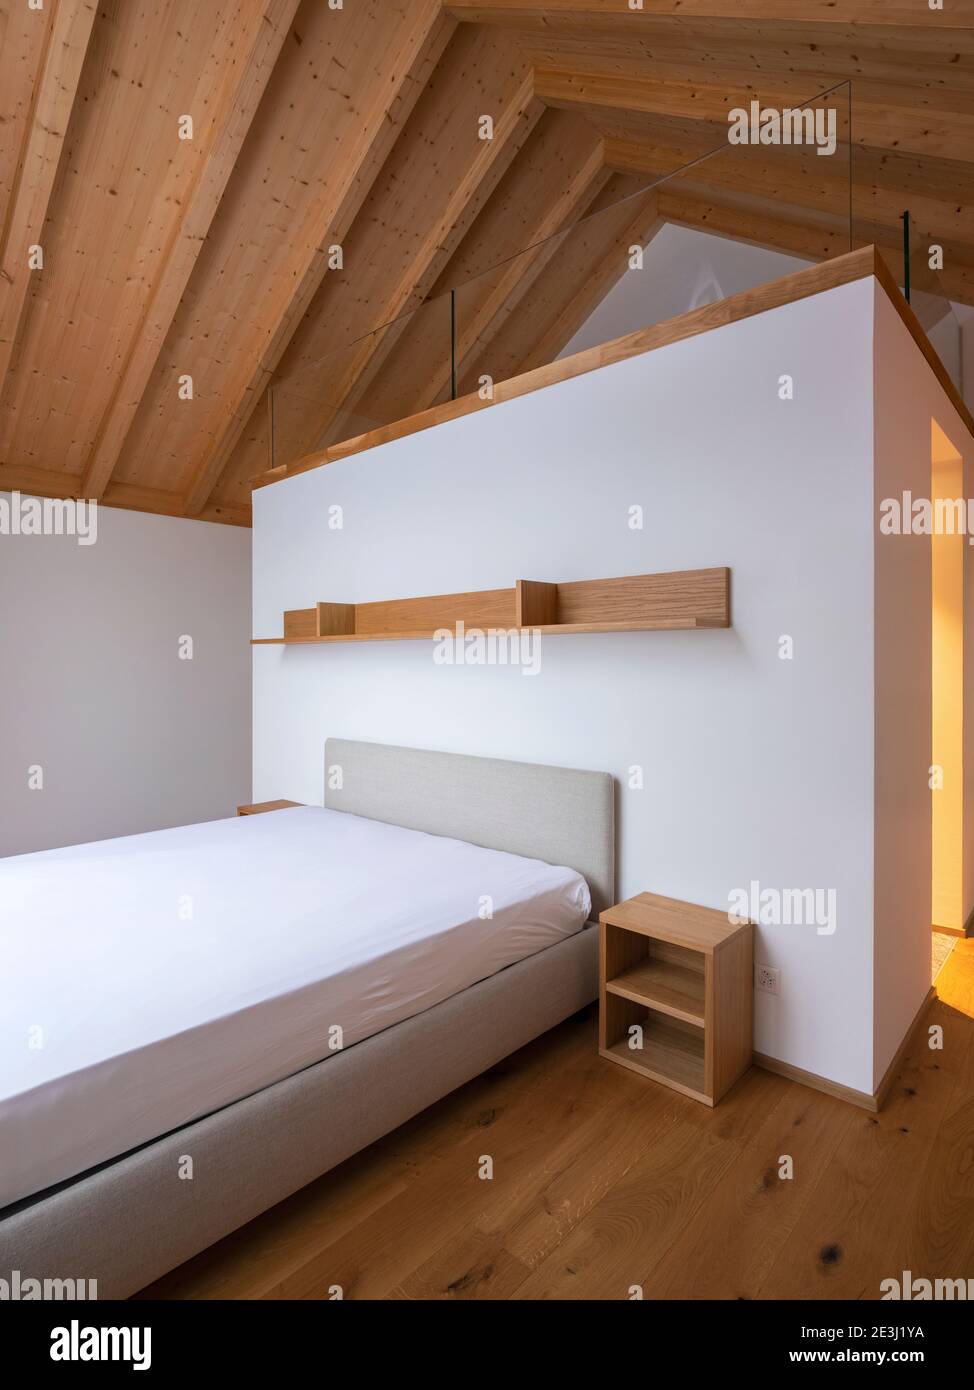 Interior of modern home with white walls and hardwood floors. Bedroom with loft, wodden shelf and bathroom. Nobody inside Stock Photo